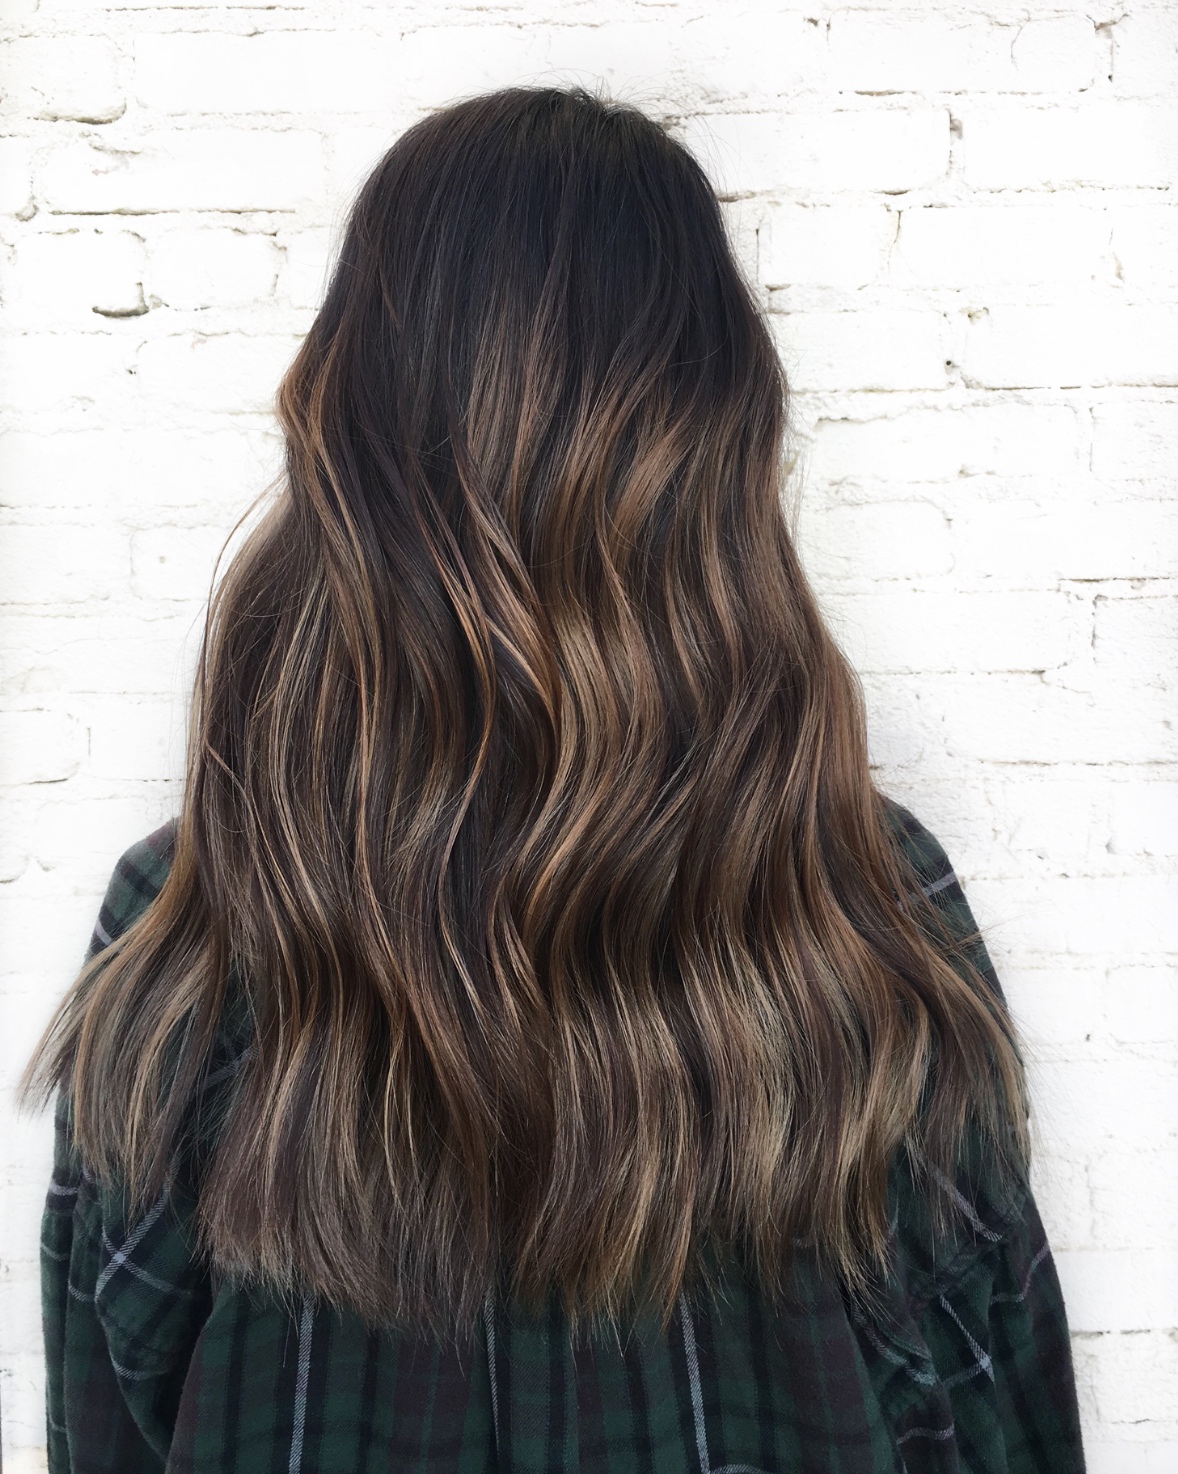 Balayage vs. Highlights: Which is Right For You?